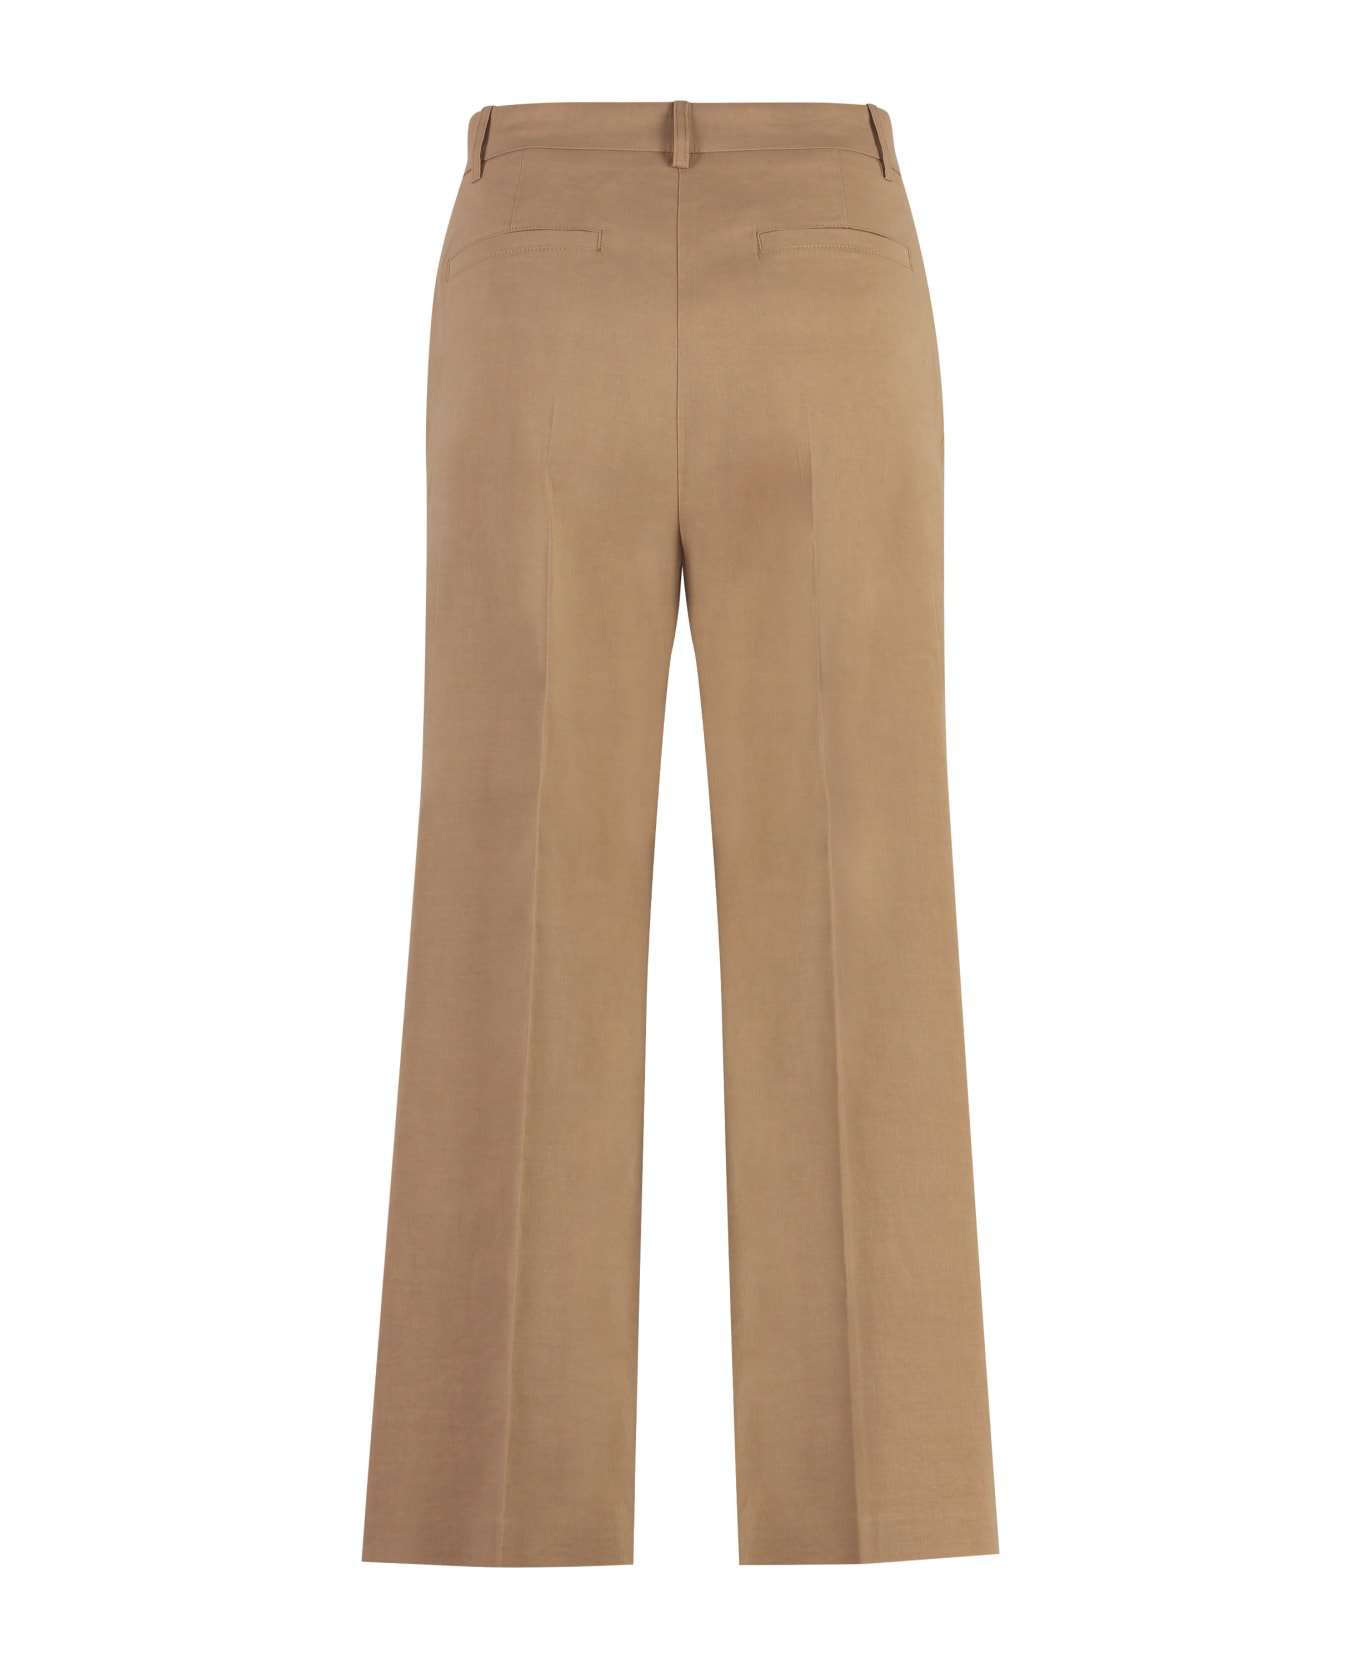 Pinko Protesilao Cropped Trousers - Beige ボトムス